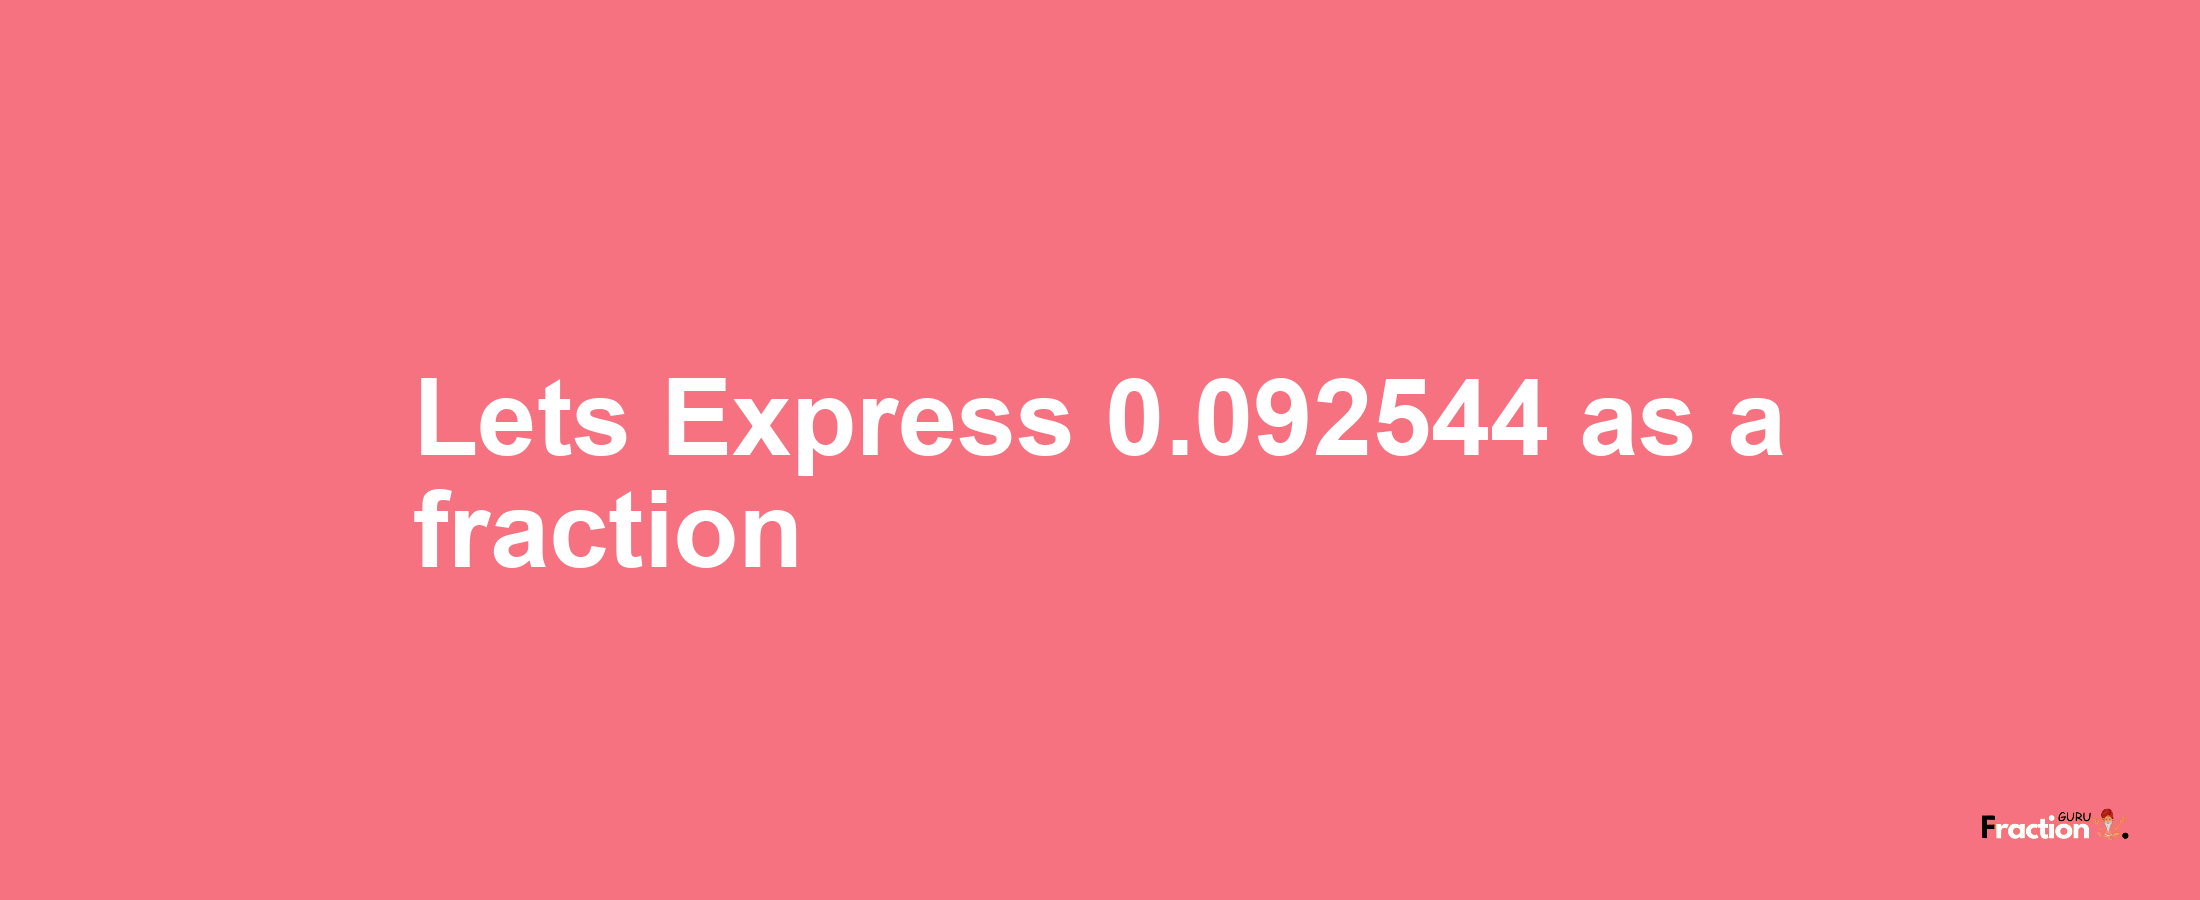 Lets Express 0.092544 as afraction